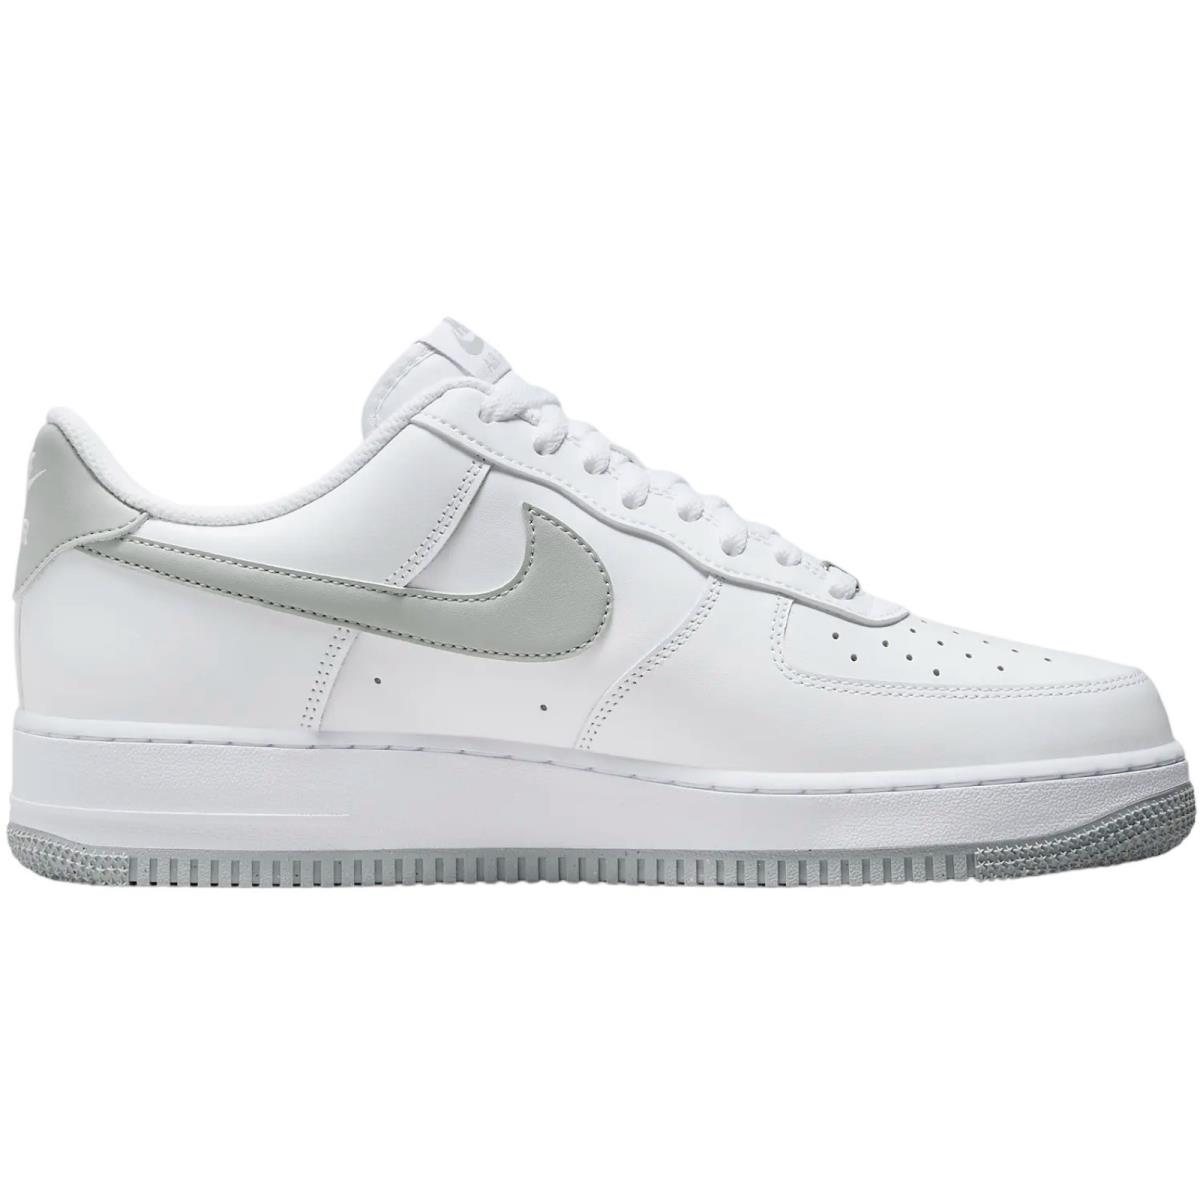 Nike Air Force 1 `07 Men`s Casual Shoes All Colors US Sizes 7-14 White/White/Light Smoke Grey